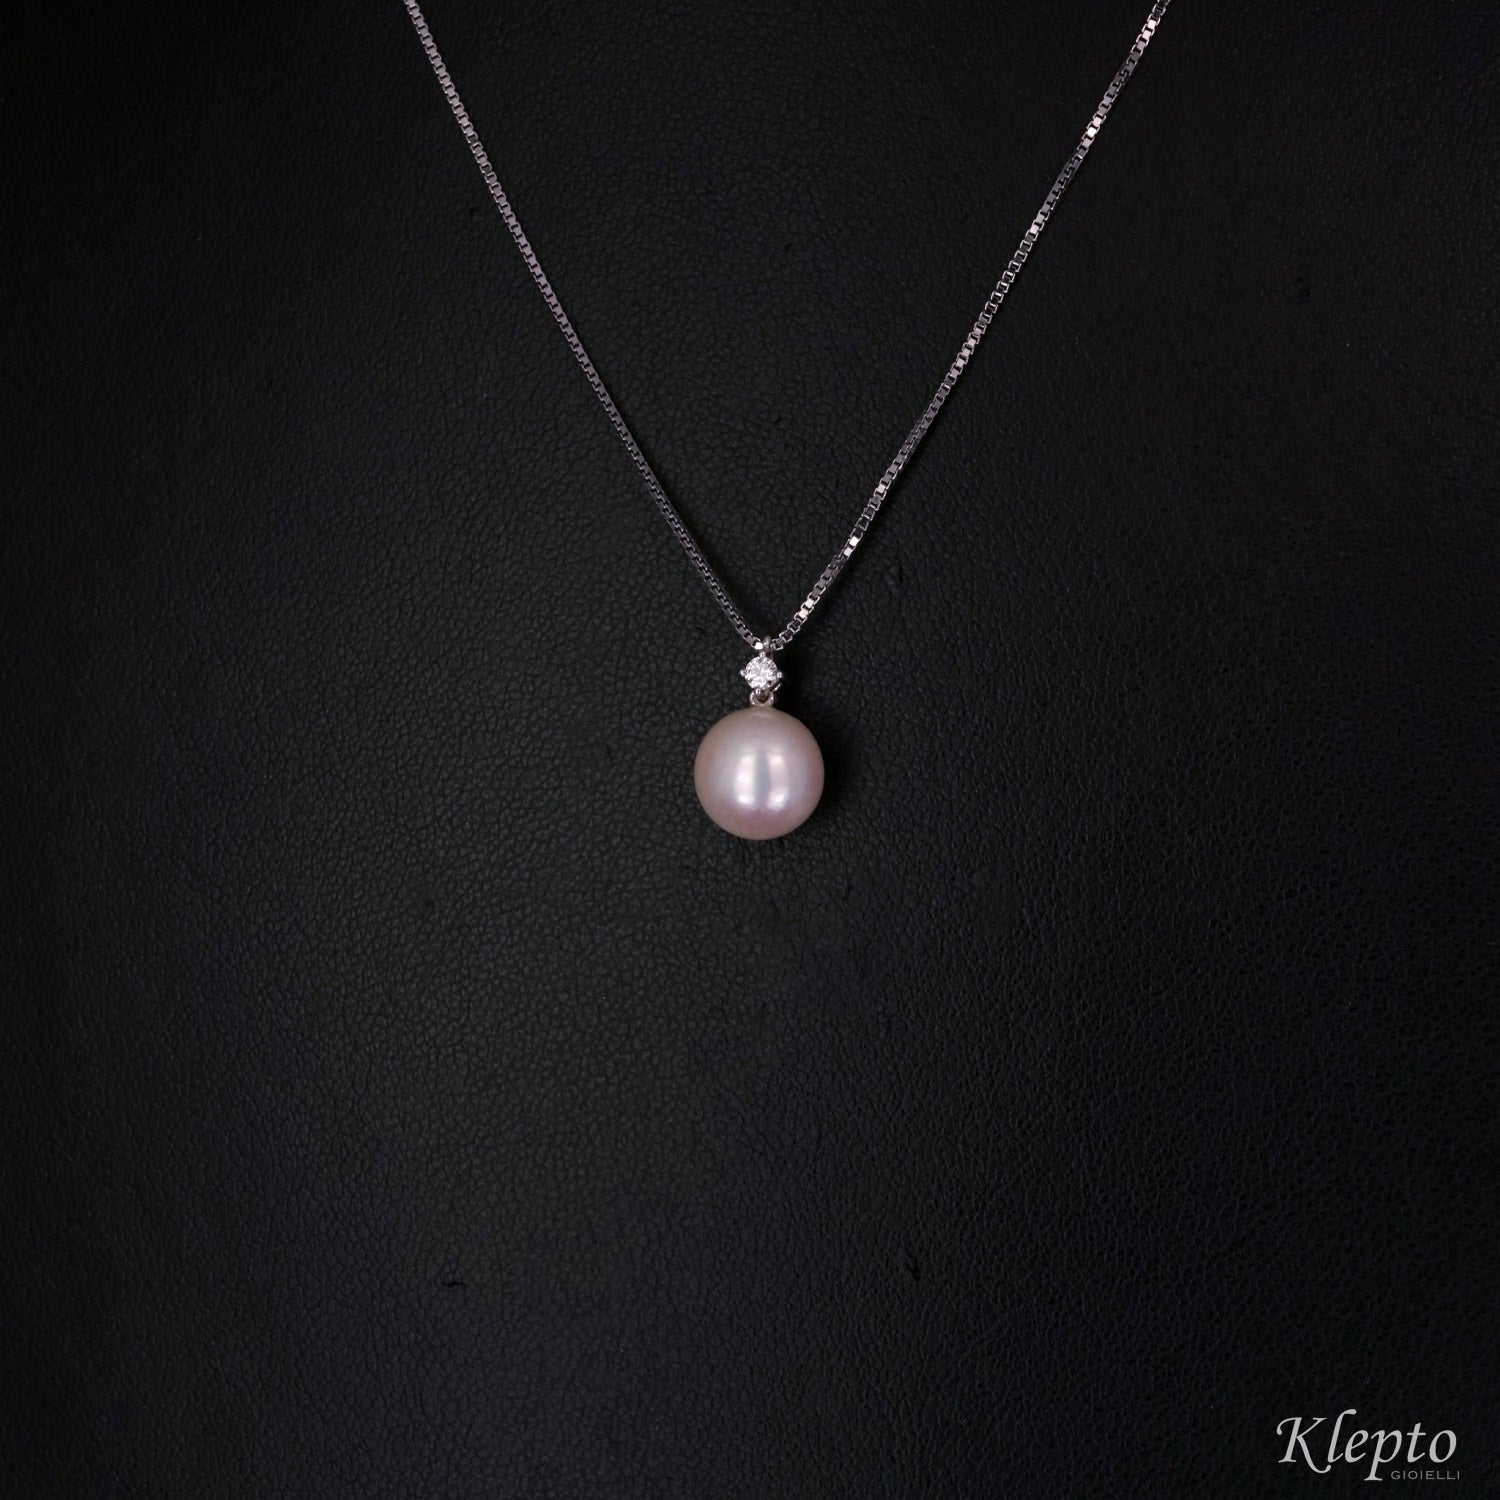 White gold pendant with Japanese pearl and diamond